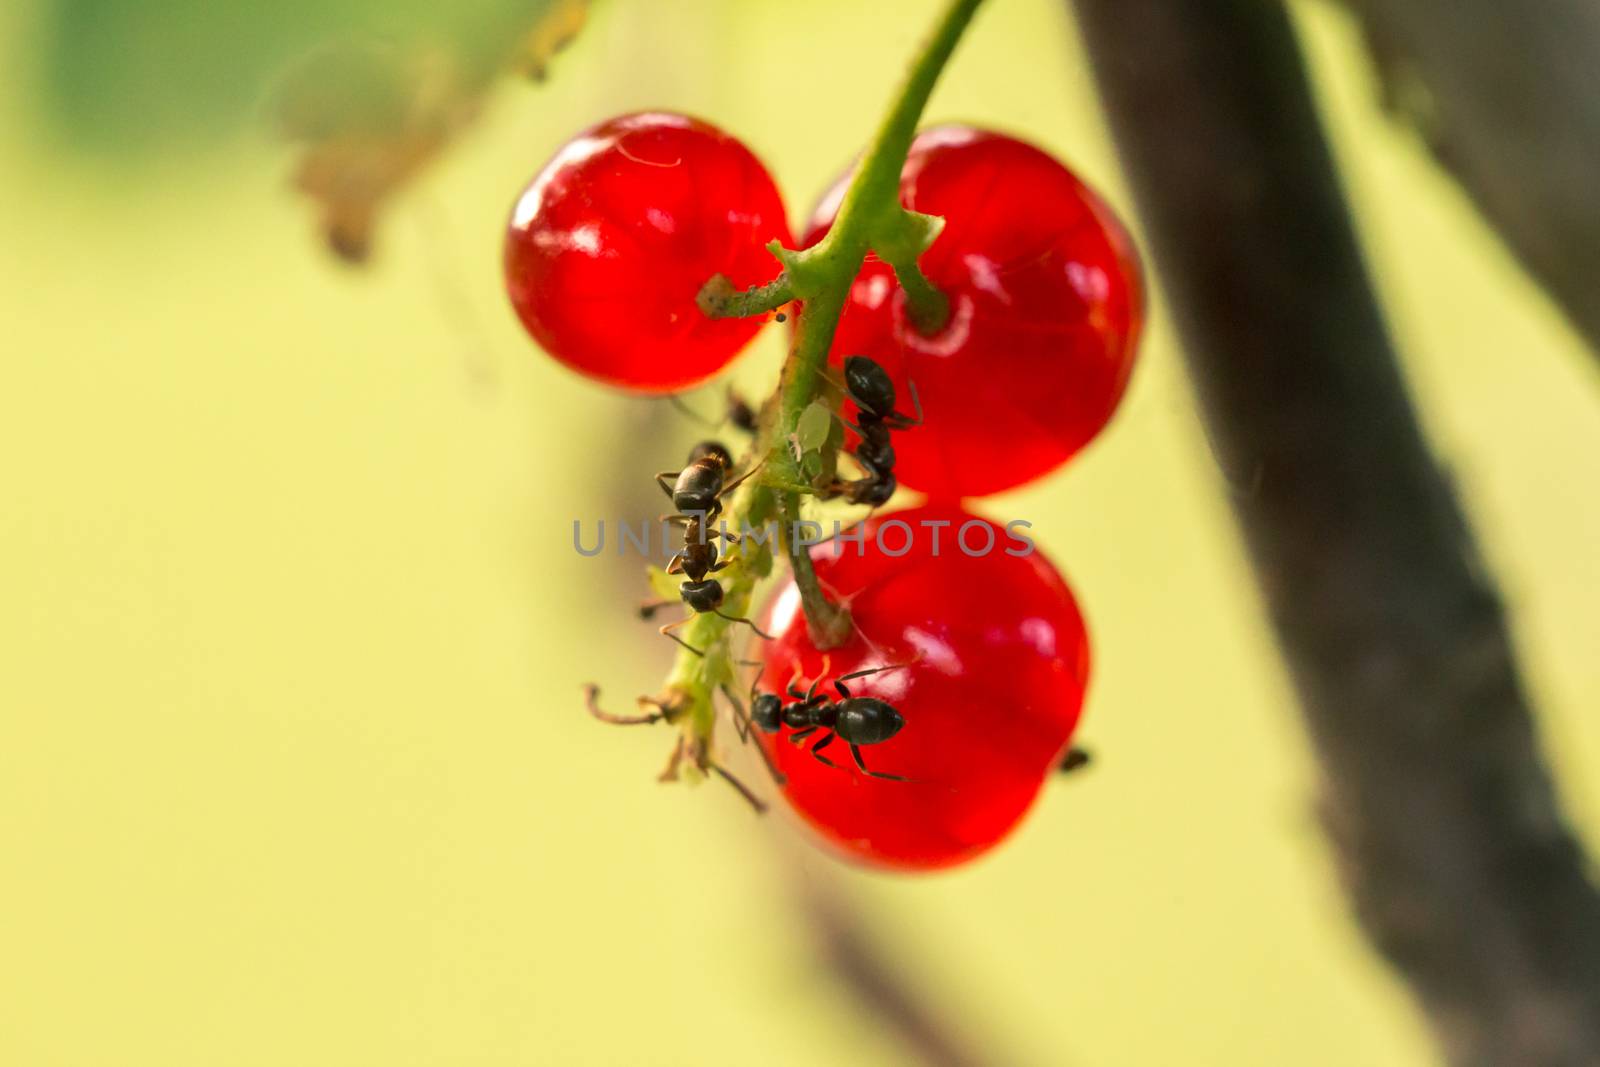 Currant bush with red ripe berries with ants in the sunny summer garden, in the back light, close-up.